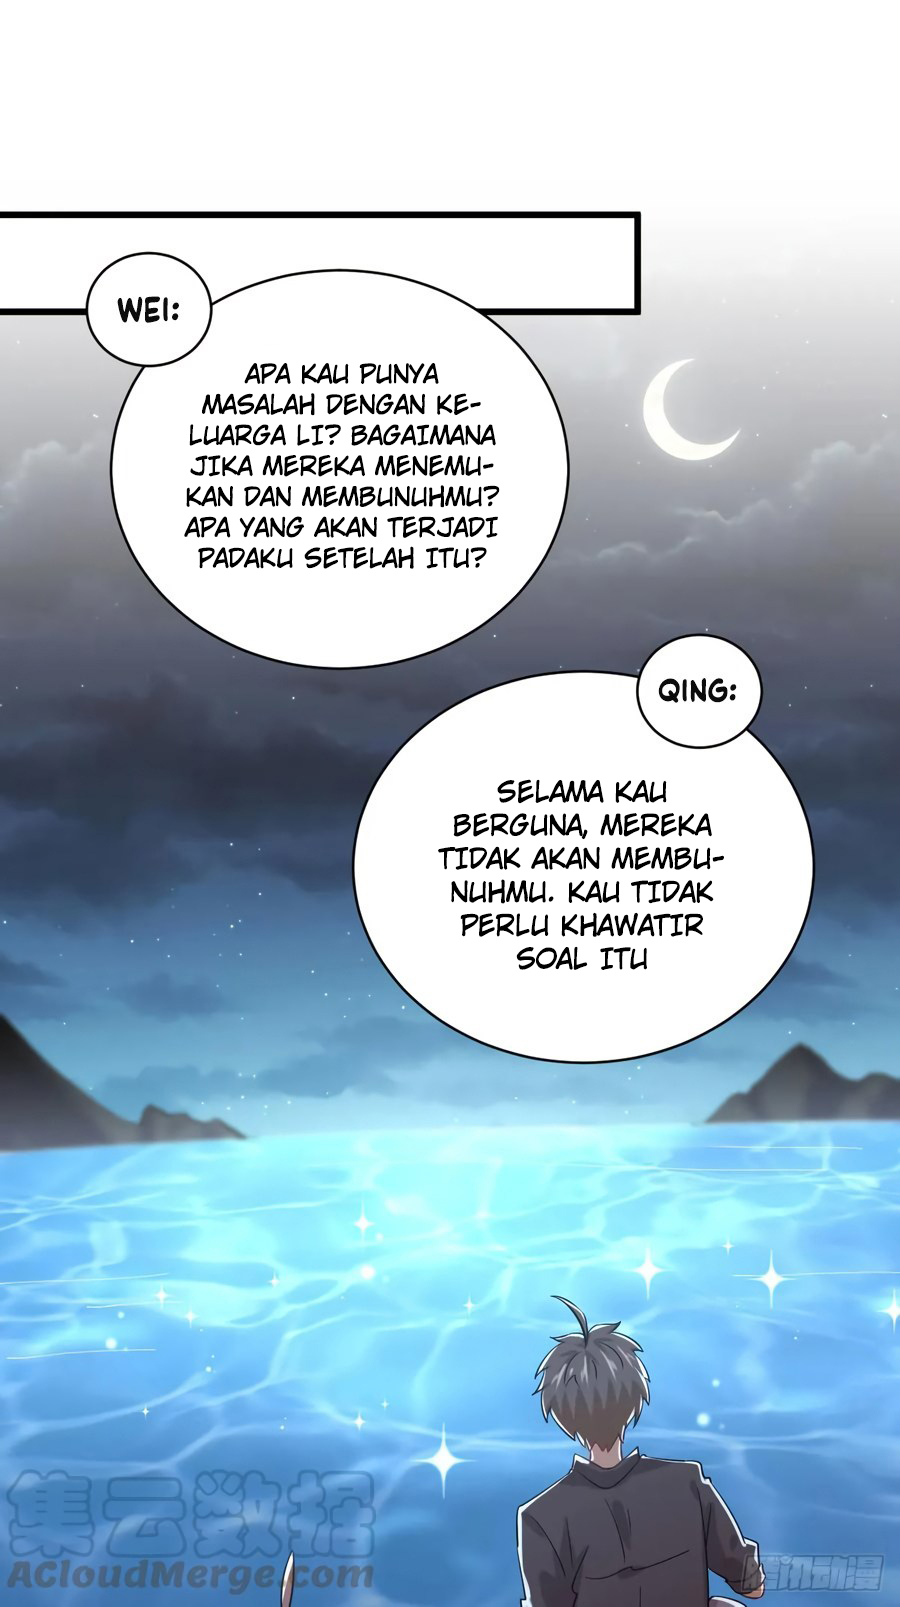 Immortal Swordsman in The Reverse World Chapter 106